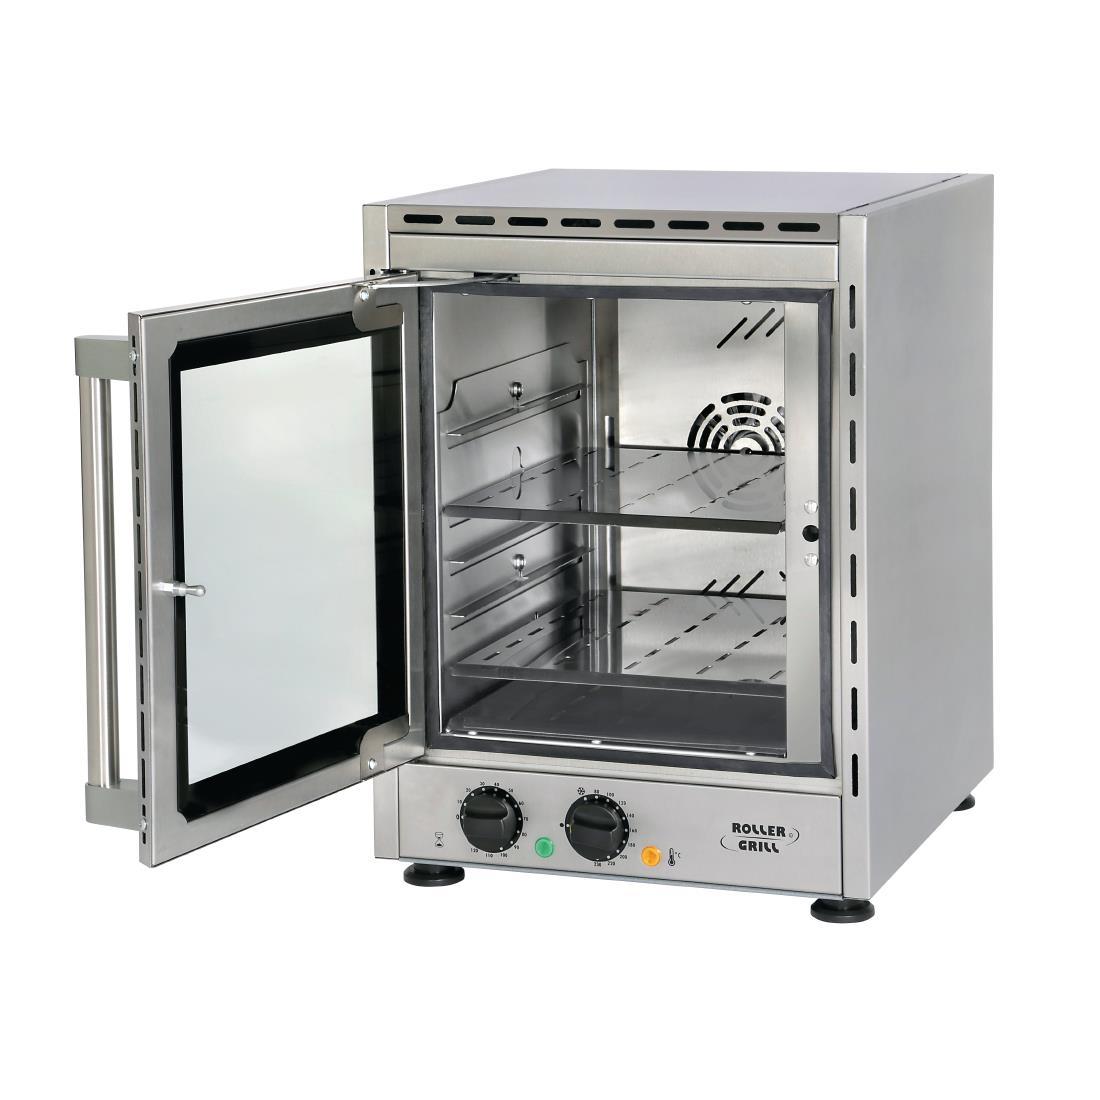 Roller Grill Convection Oven FCV280 - GP319  - 2